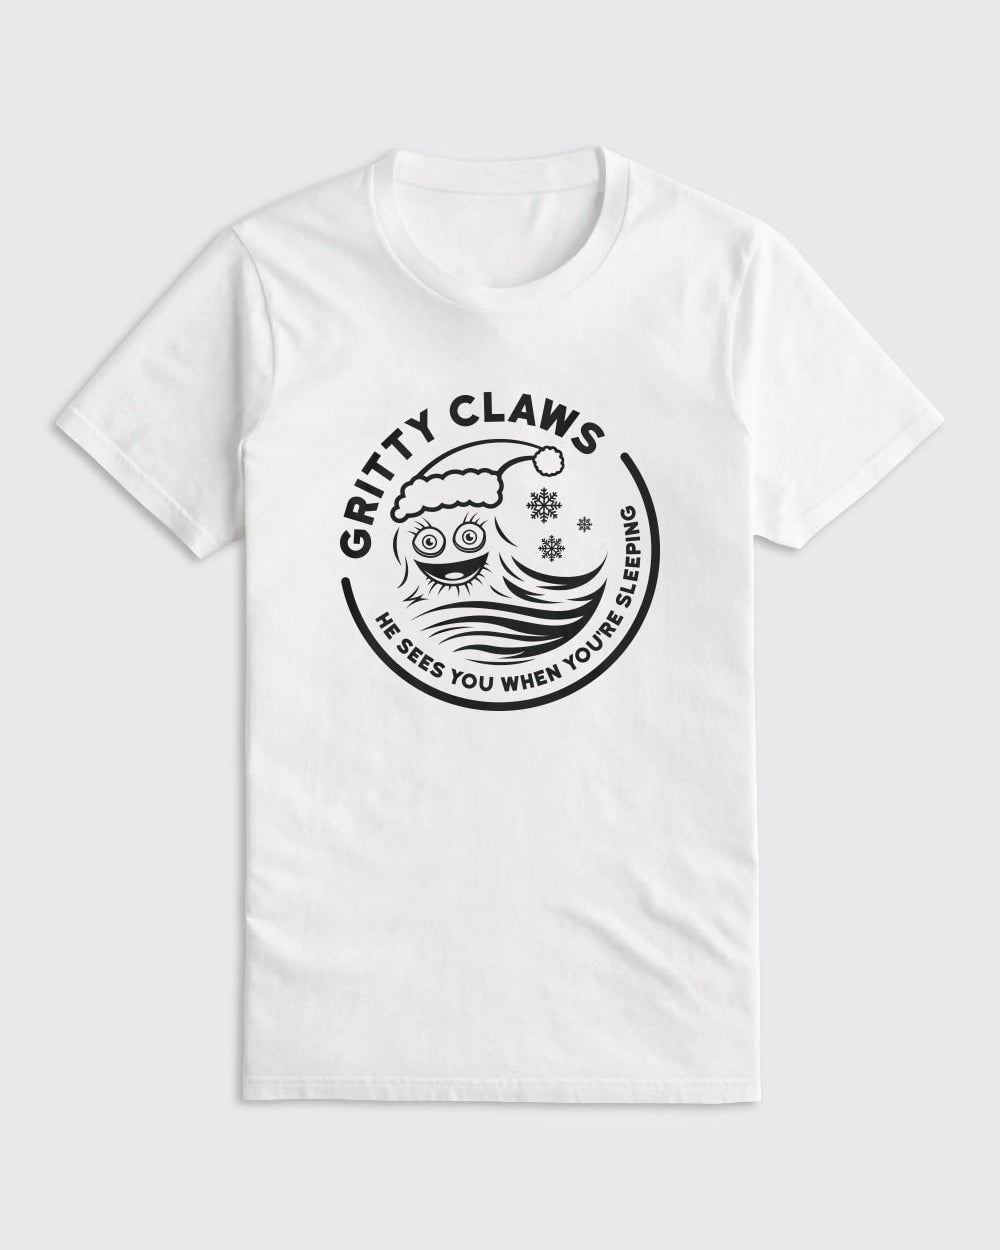 Gritty Claws Shirt - Philly Sports Shirts